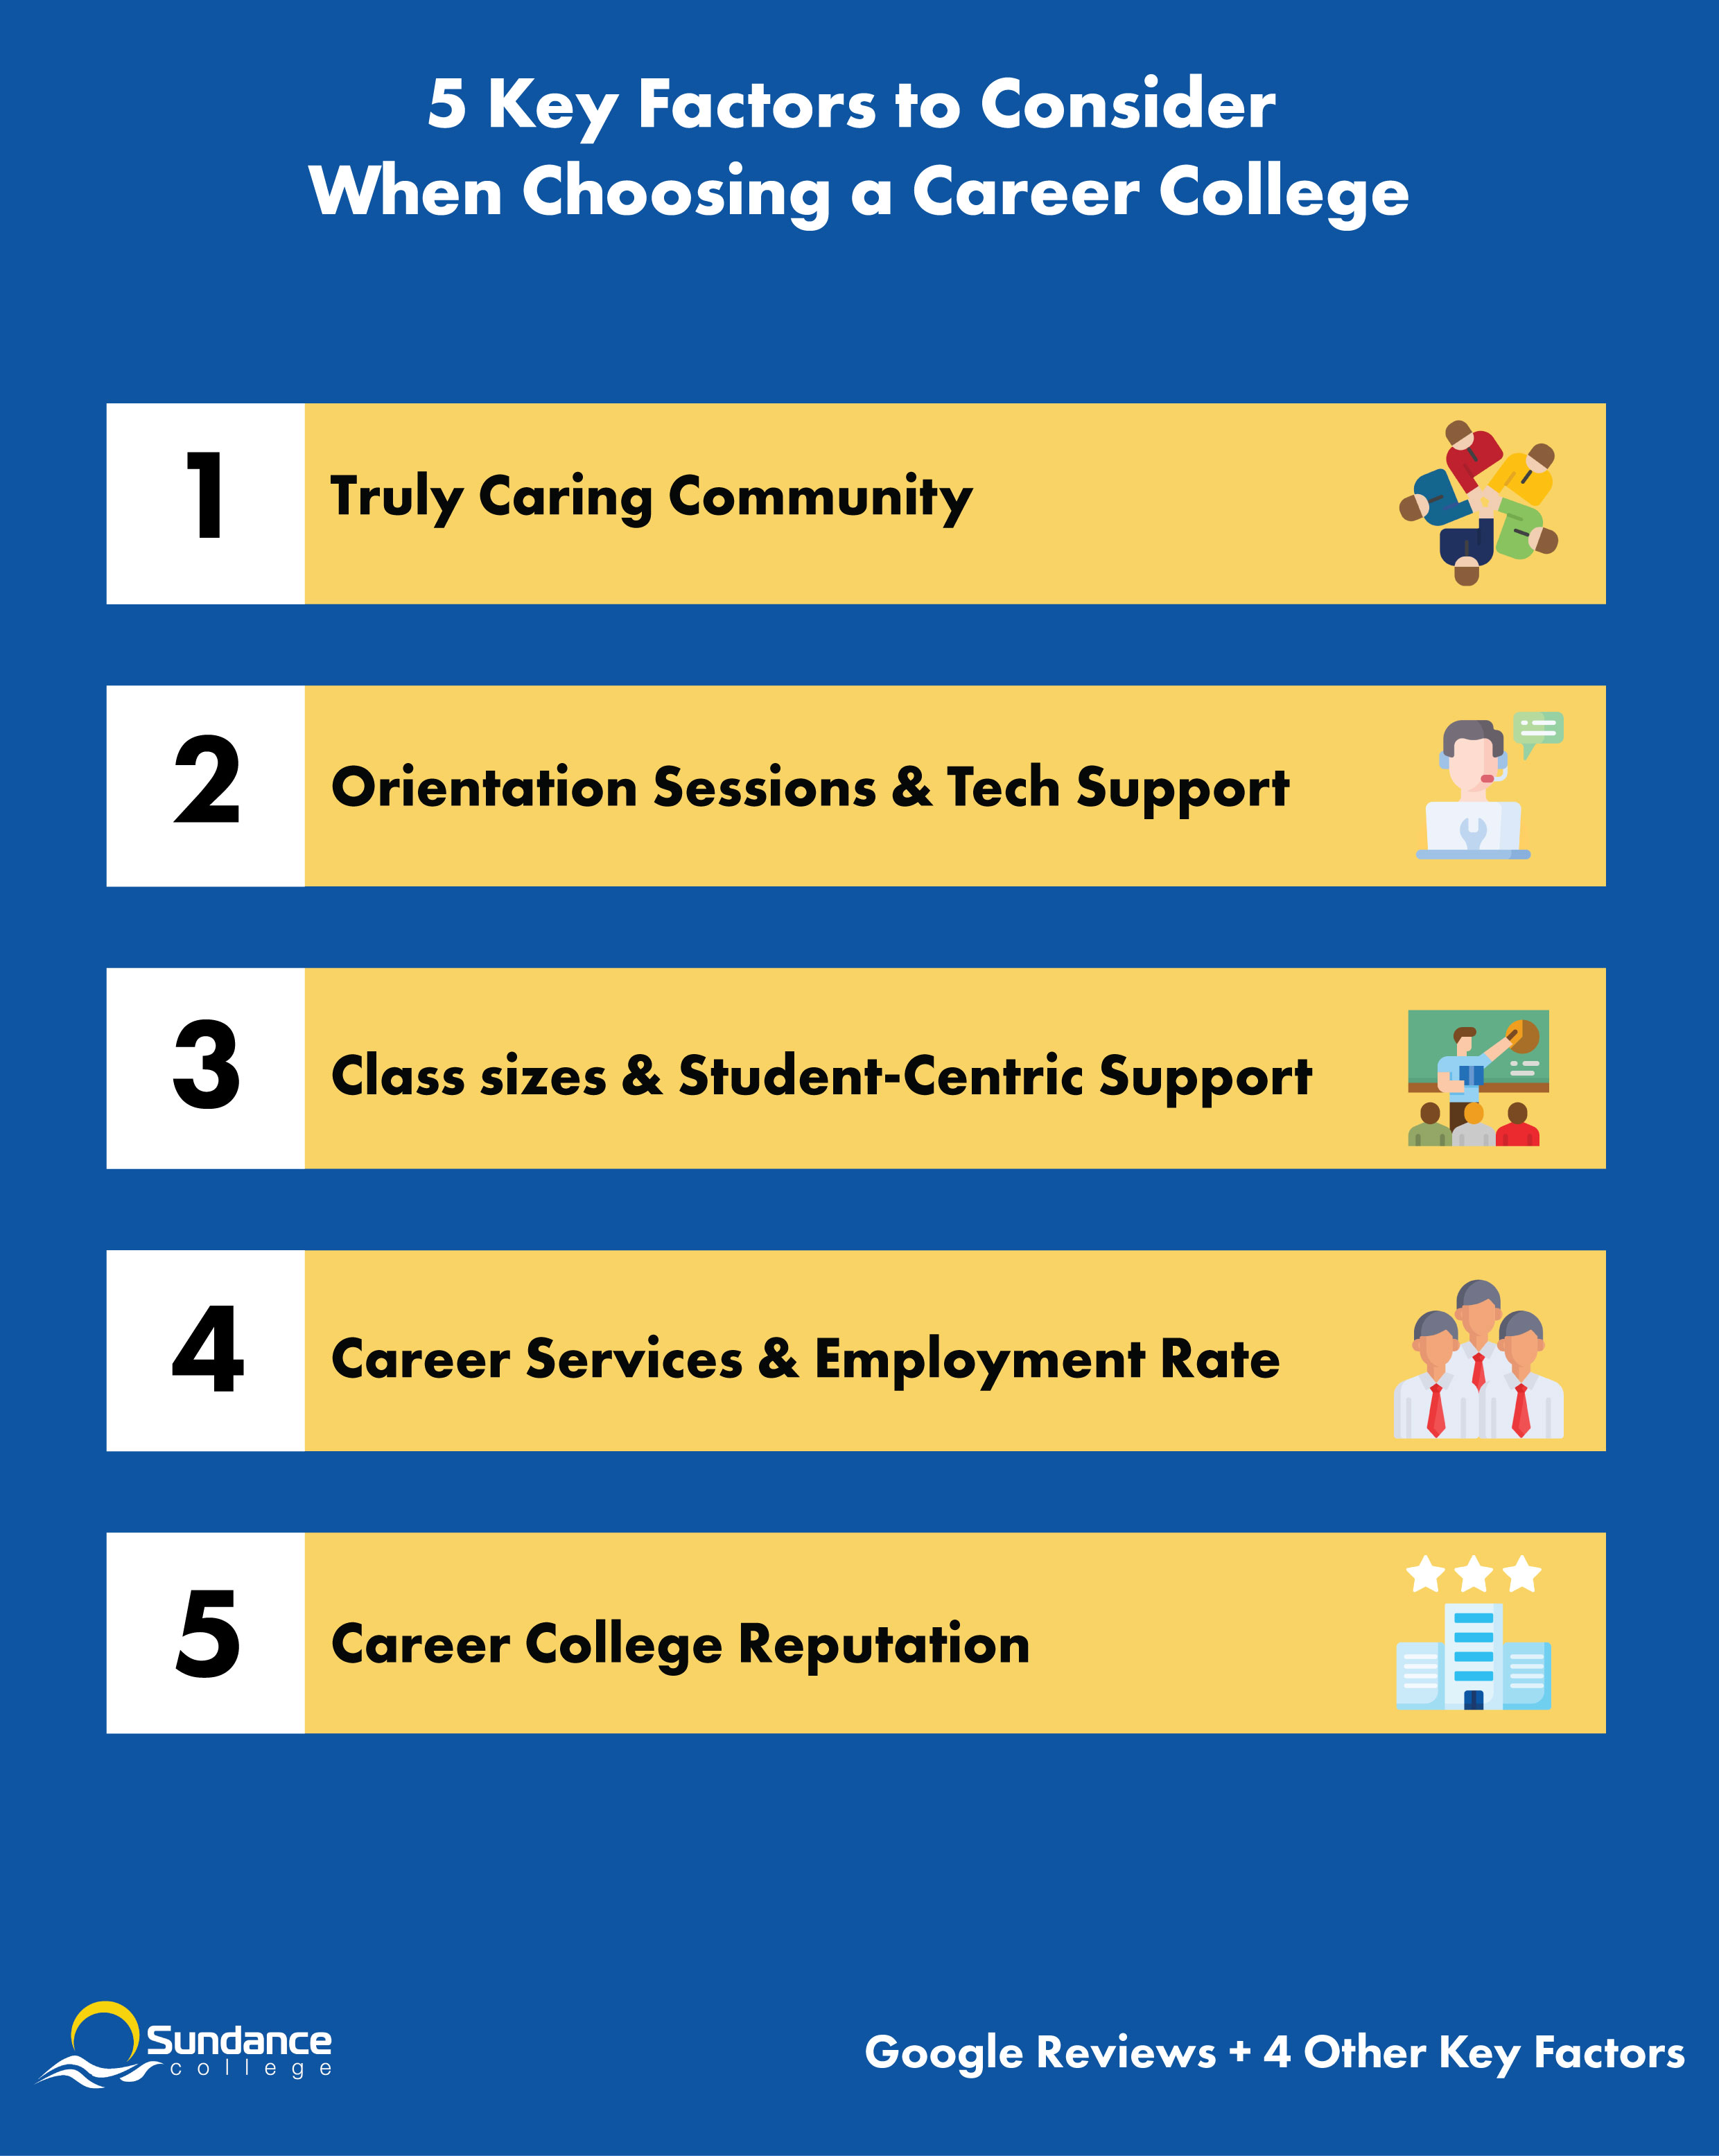 5 Key factors to consider when choosing a career college infographic that includes truly caring community, orientation sessions and tech support, class sizes and student-centric support, career services and employment rate, and career college reputation based on Google Reviews.